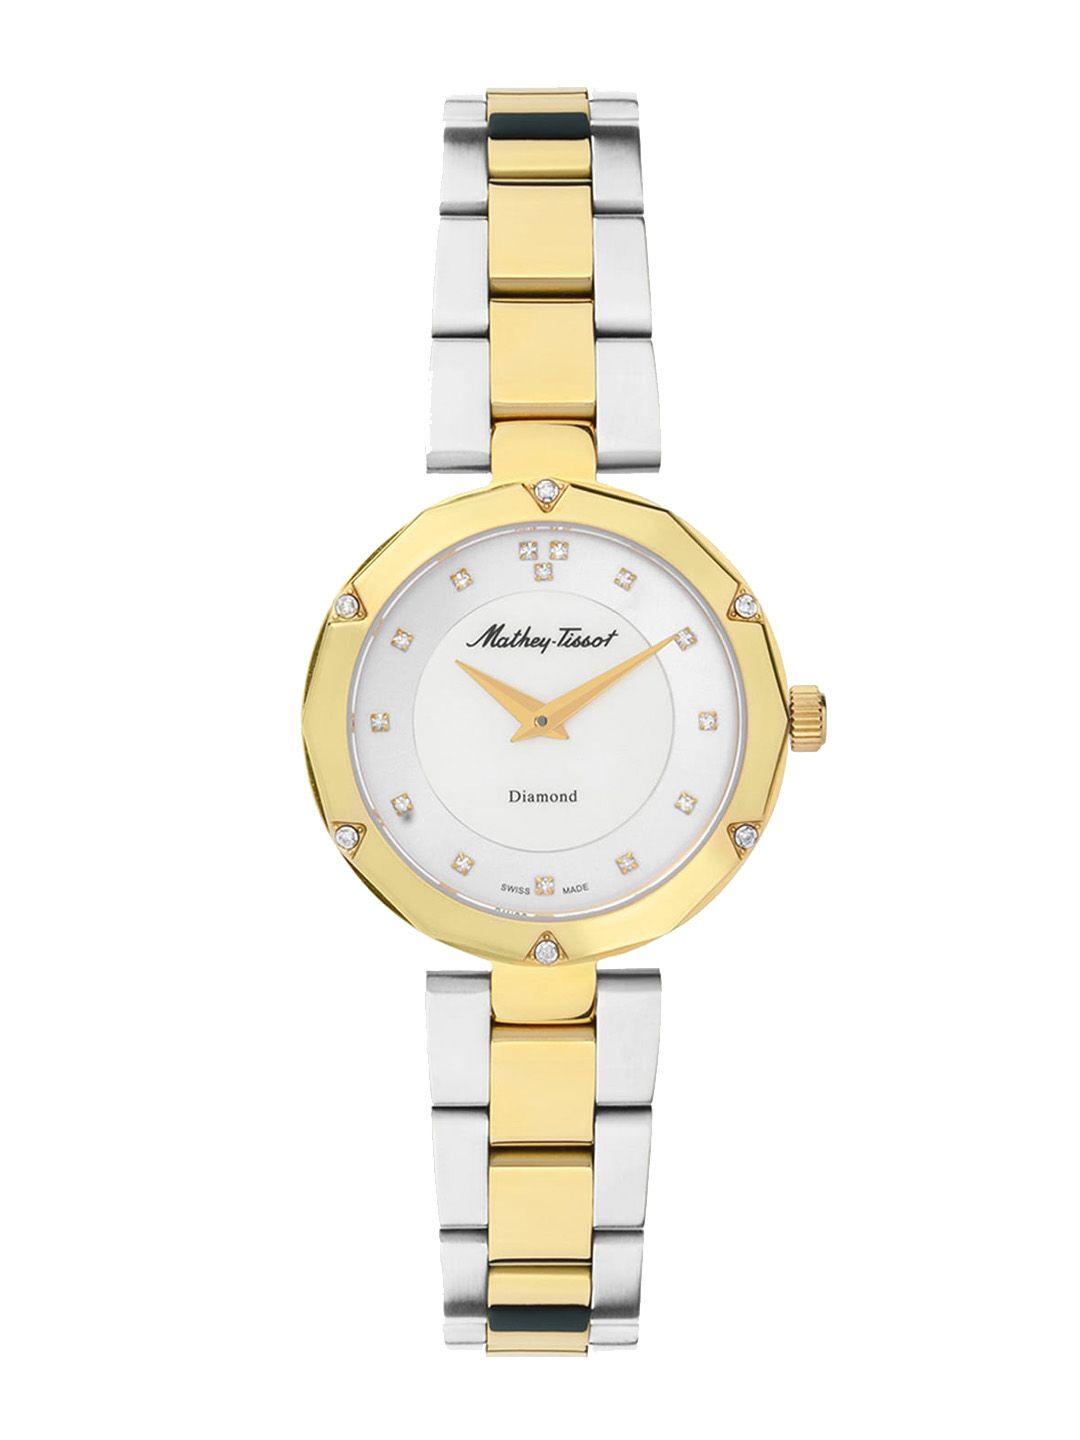 mathey-tissot women mother of pearl dial & bracelet style straps analogue watch d1087bqyi